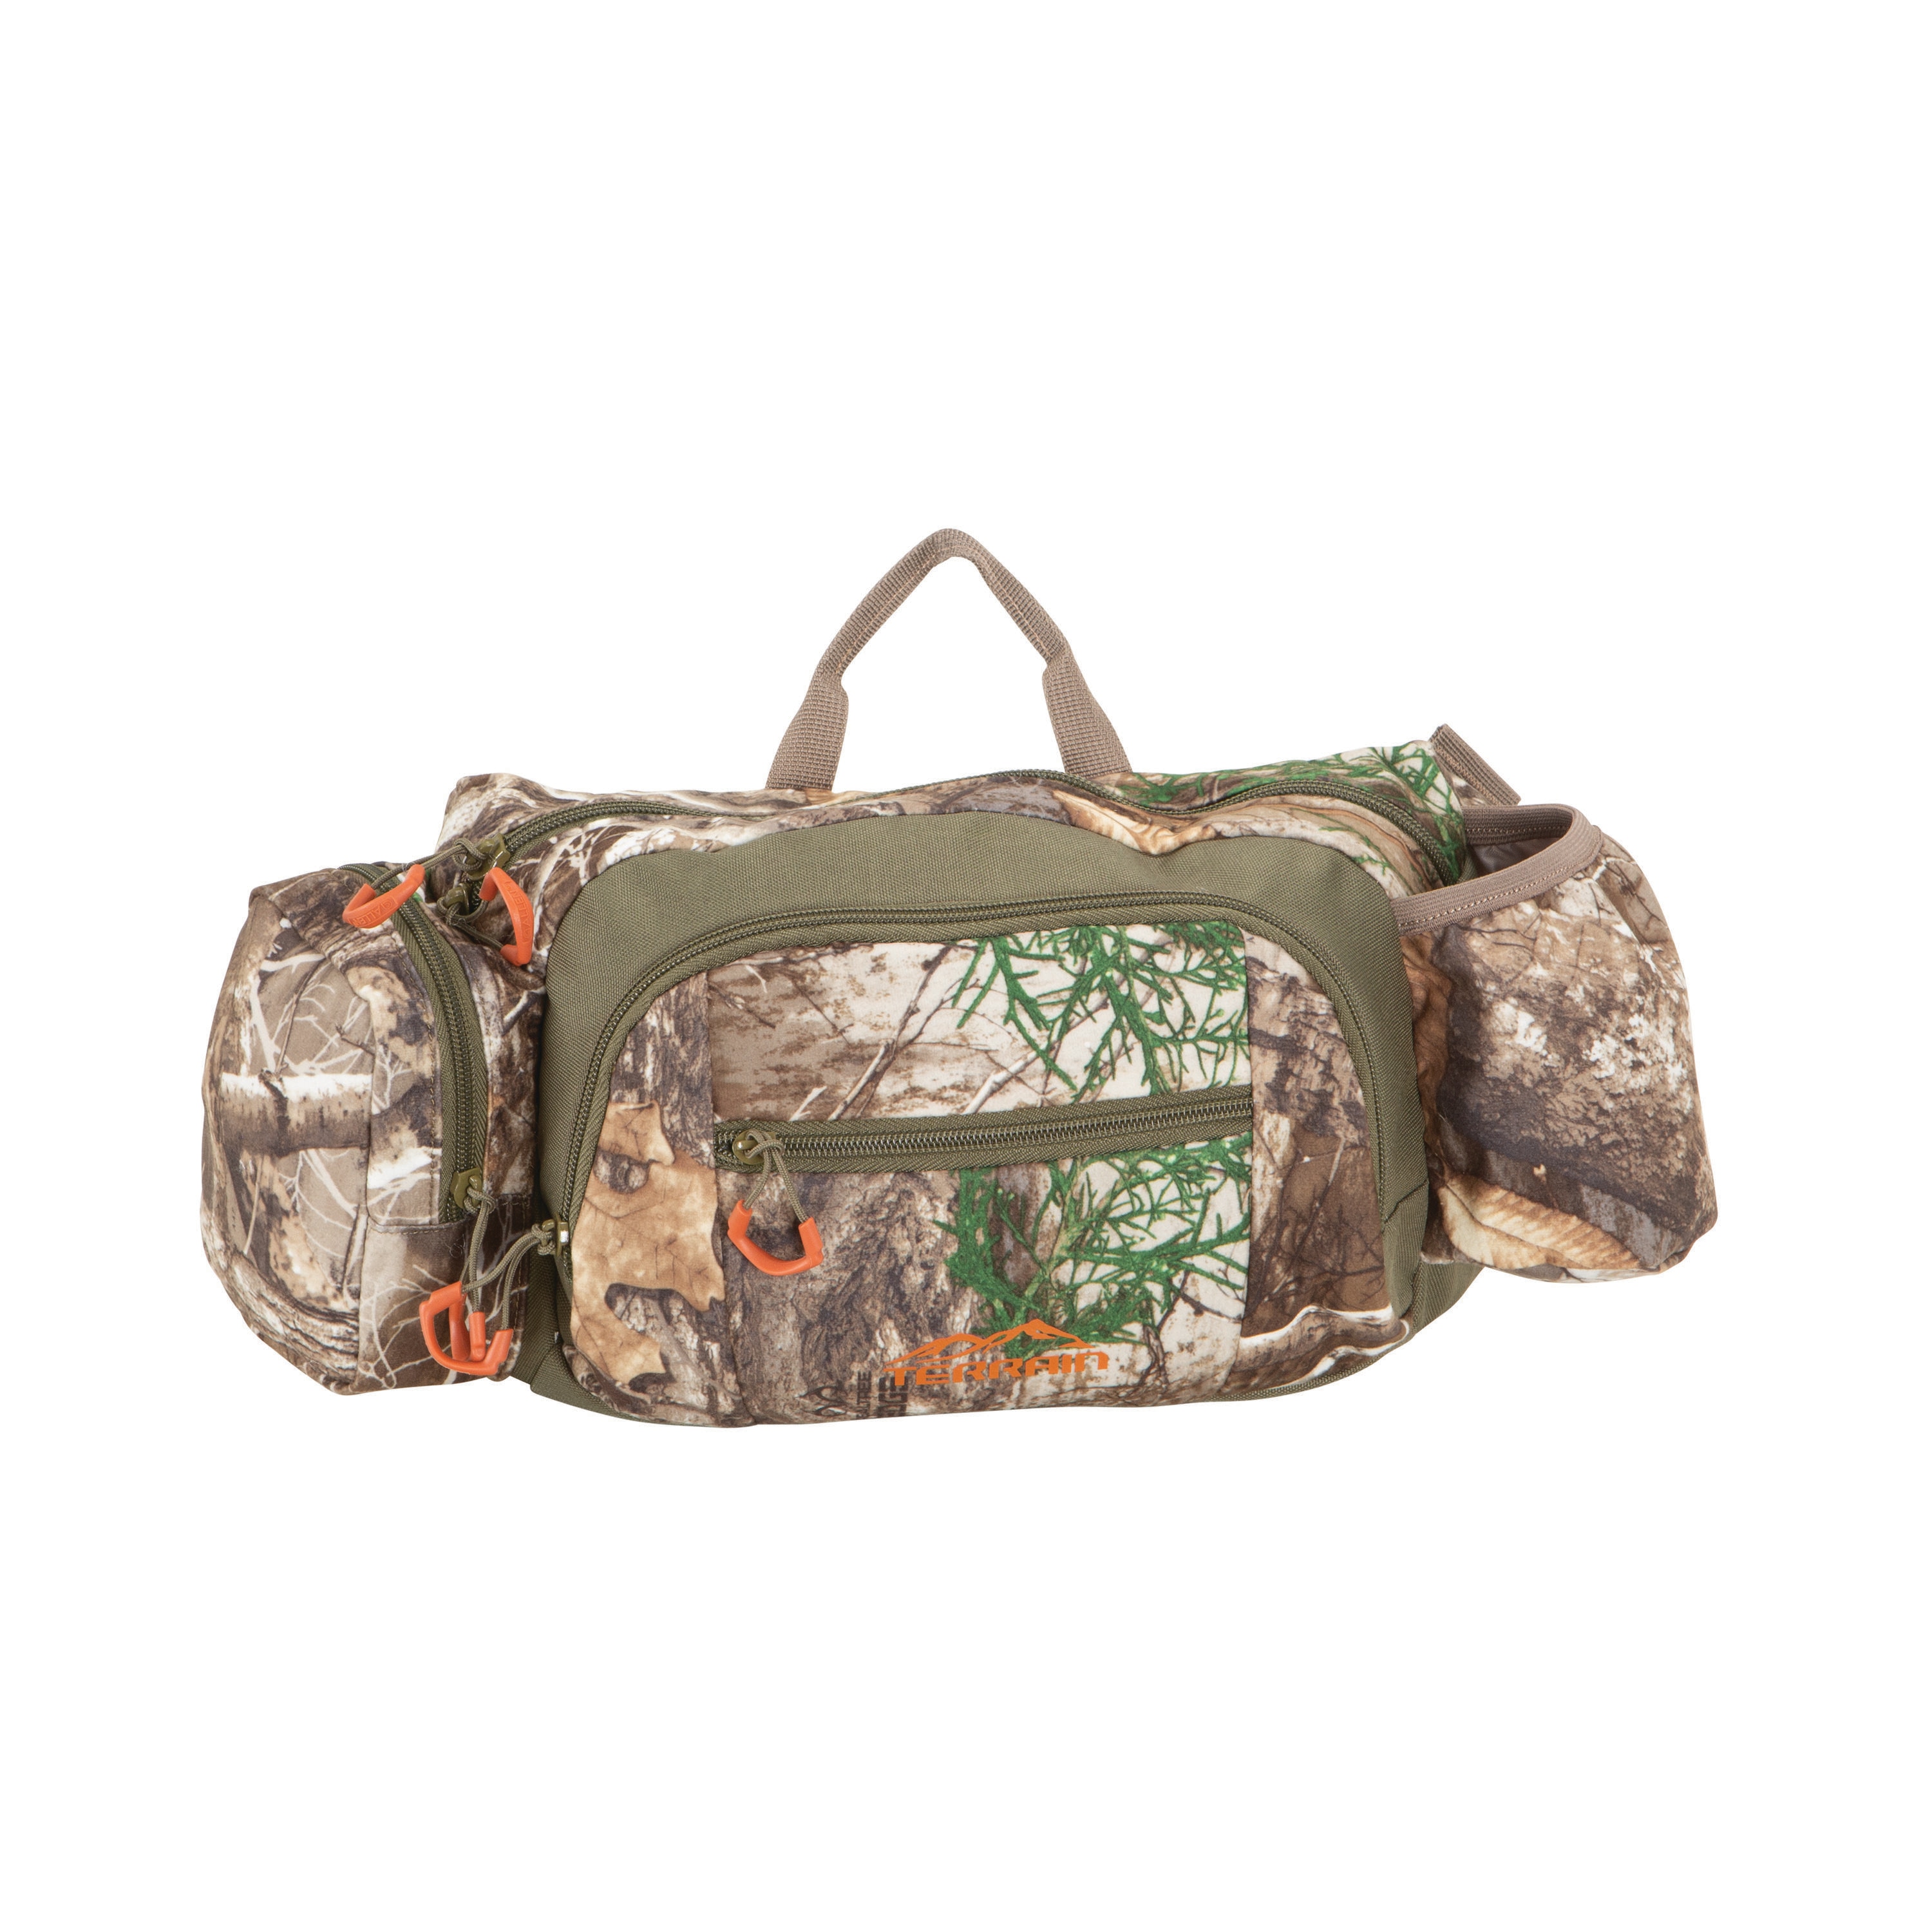  Hunters Specialties Camo Spray Paint Kit : Hunting Camouflage  Accessories : Sports & Outdoors